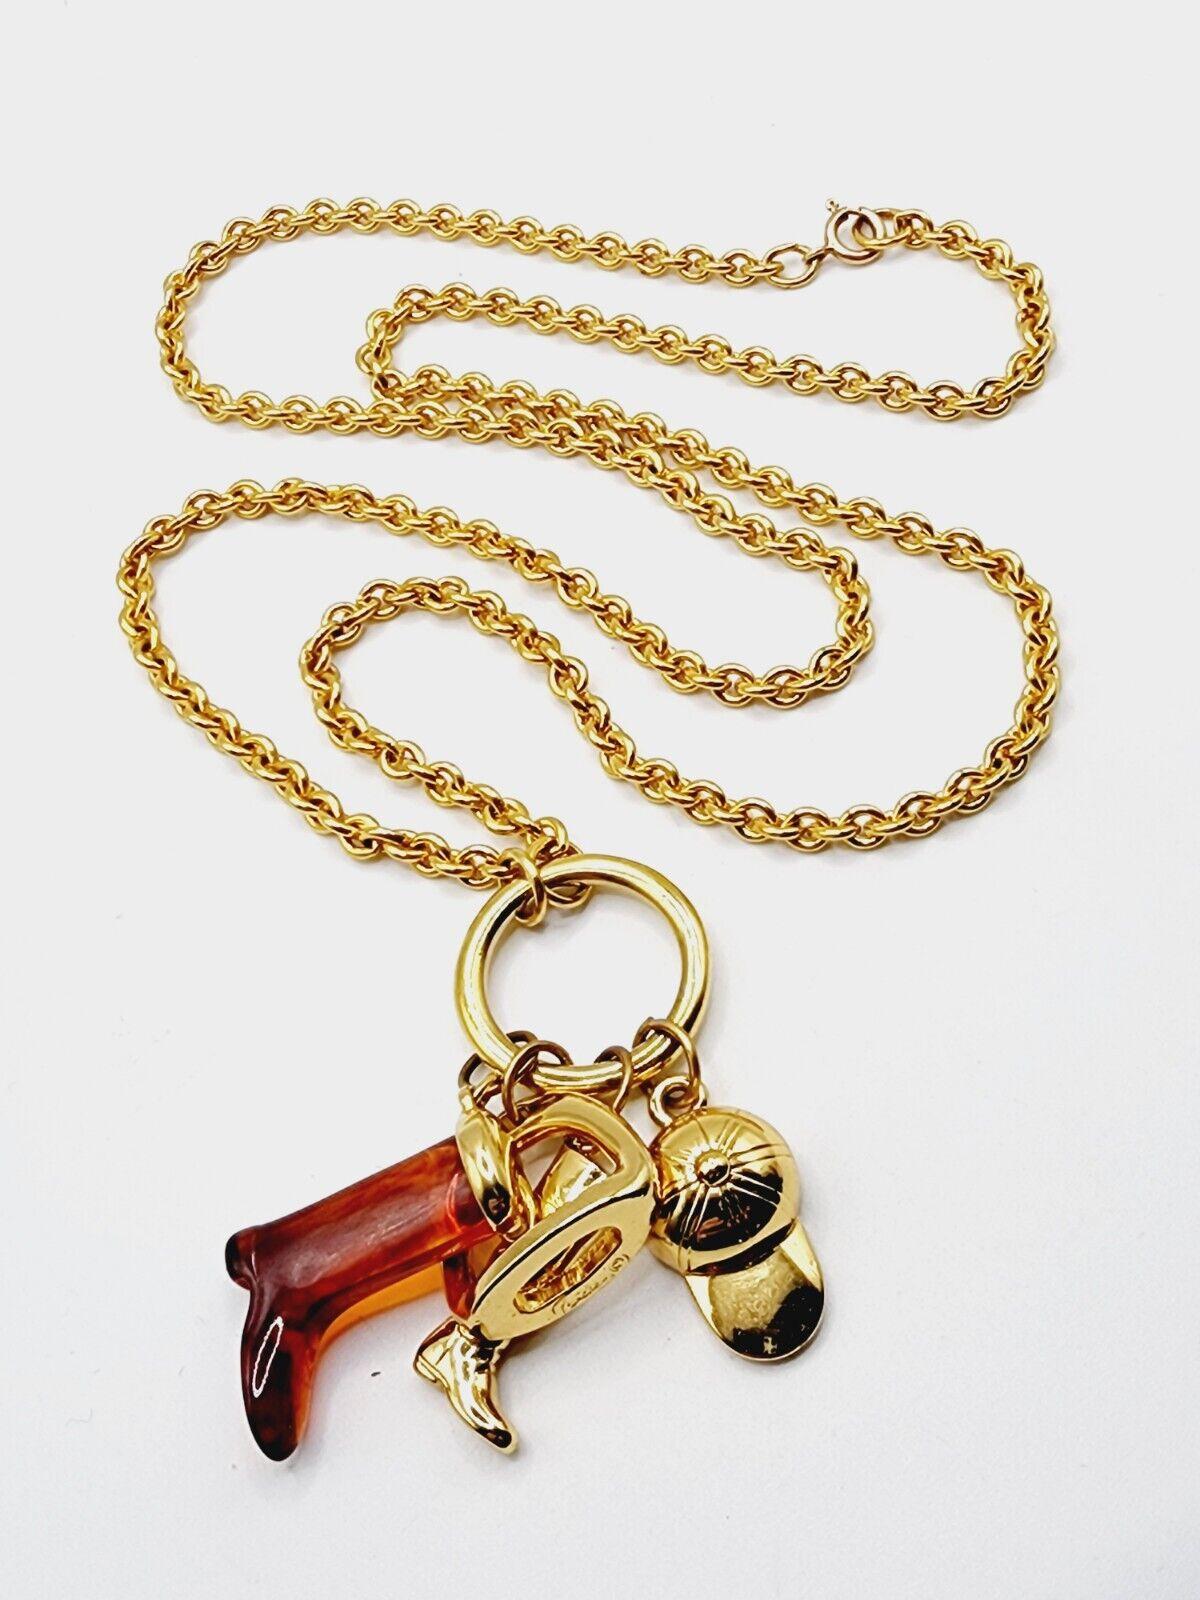 Simply Beautiful! Vintage Mid Century Modern Rare Equestrian themed Multi Charm Designer Necklace Signed CAROLEE. Featuring 4 Equestrian themed Pendant Charms, approx. 2 25” long. Suspended from a 30” long Gold-plated chain. Circa 1980s. More